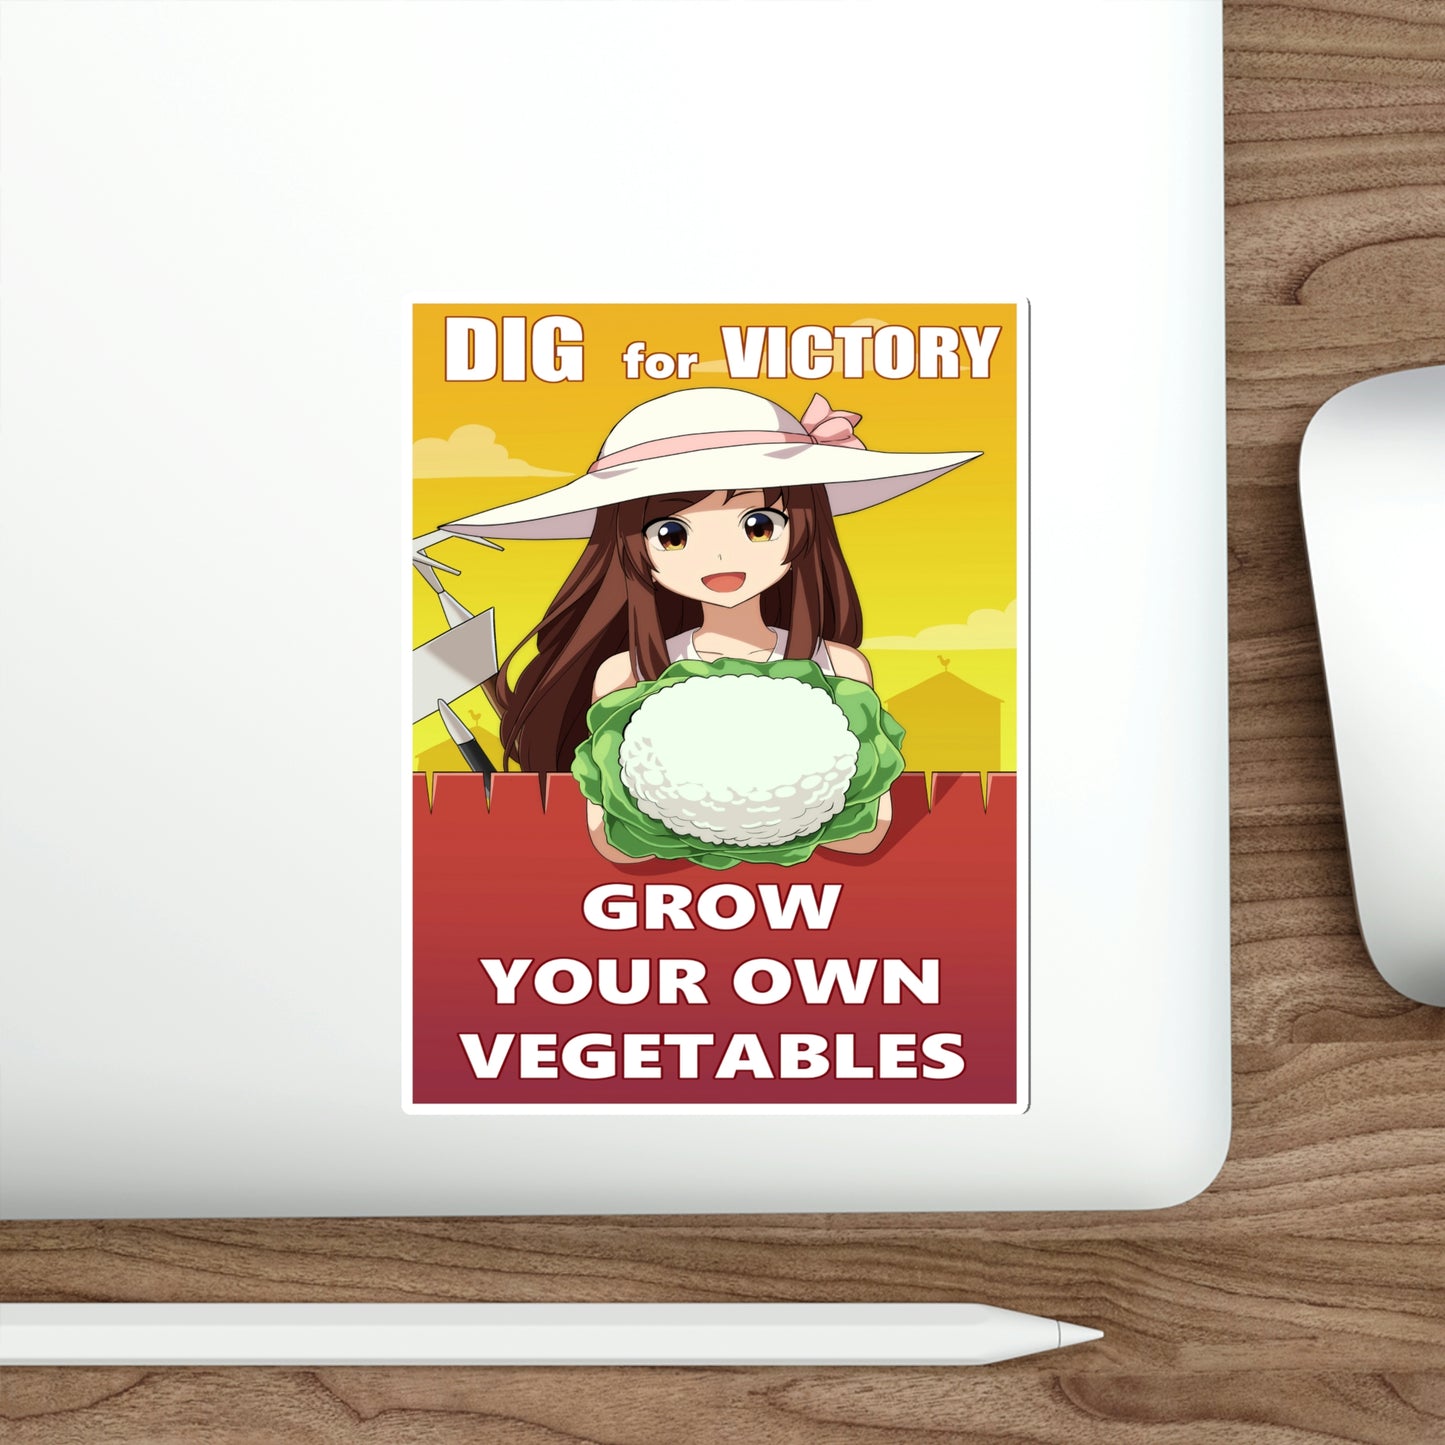 Dig for victory New Sticker